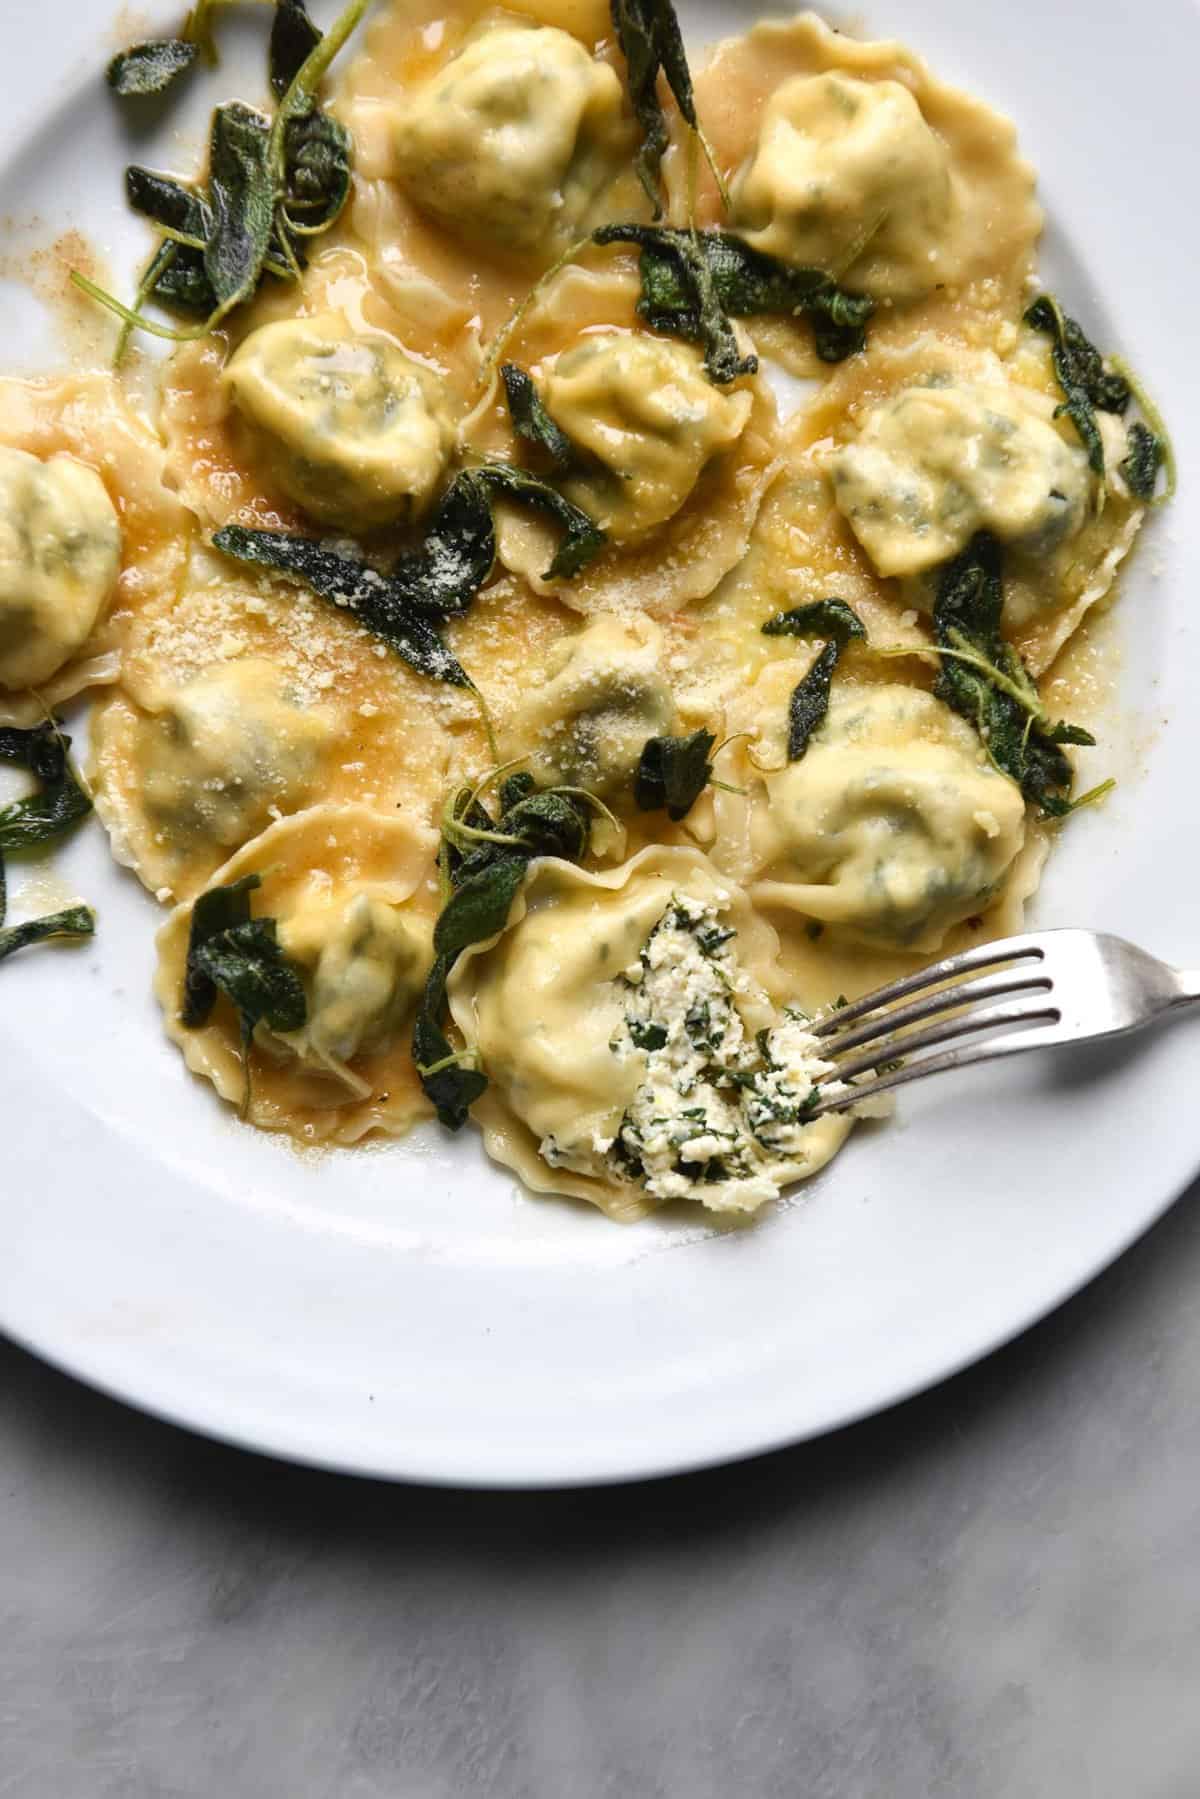 An aerial view of omemade gluten free ravioli with lactose free ricotta and spinach filling and a brown butter crispy sage topping on a white plate. One raviolo is torn open with a fork, revealing the soft ricotta interior.